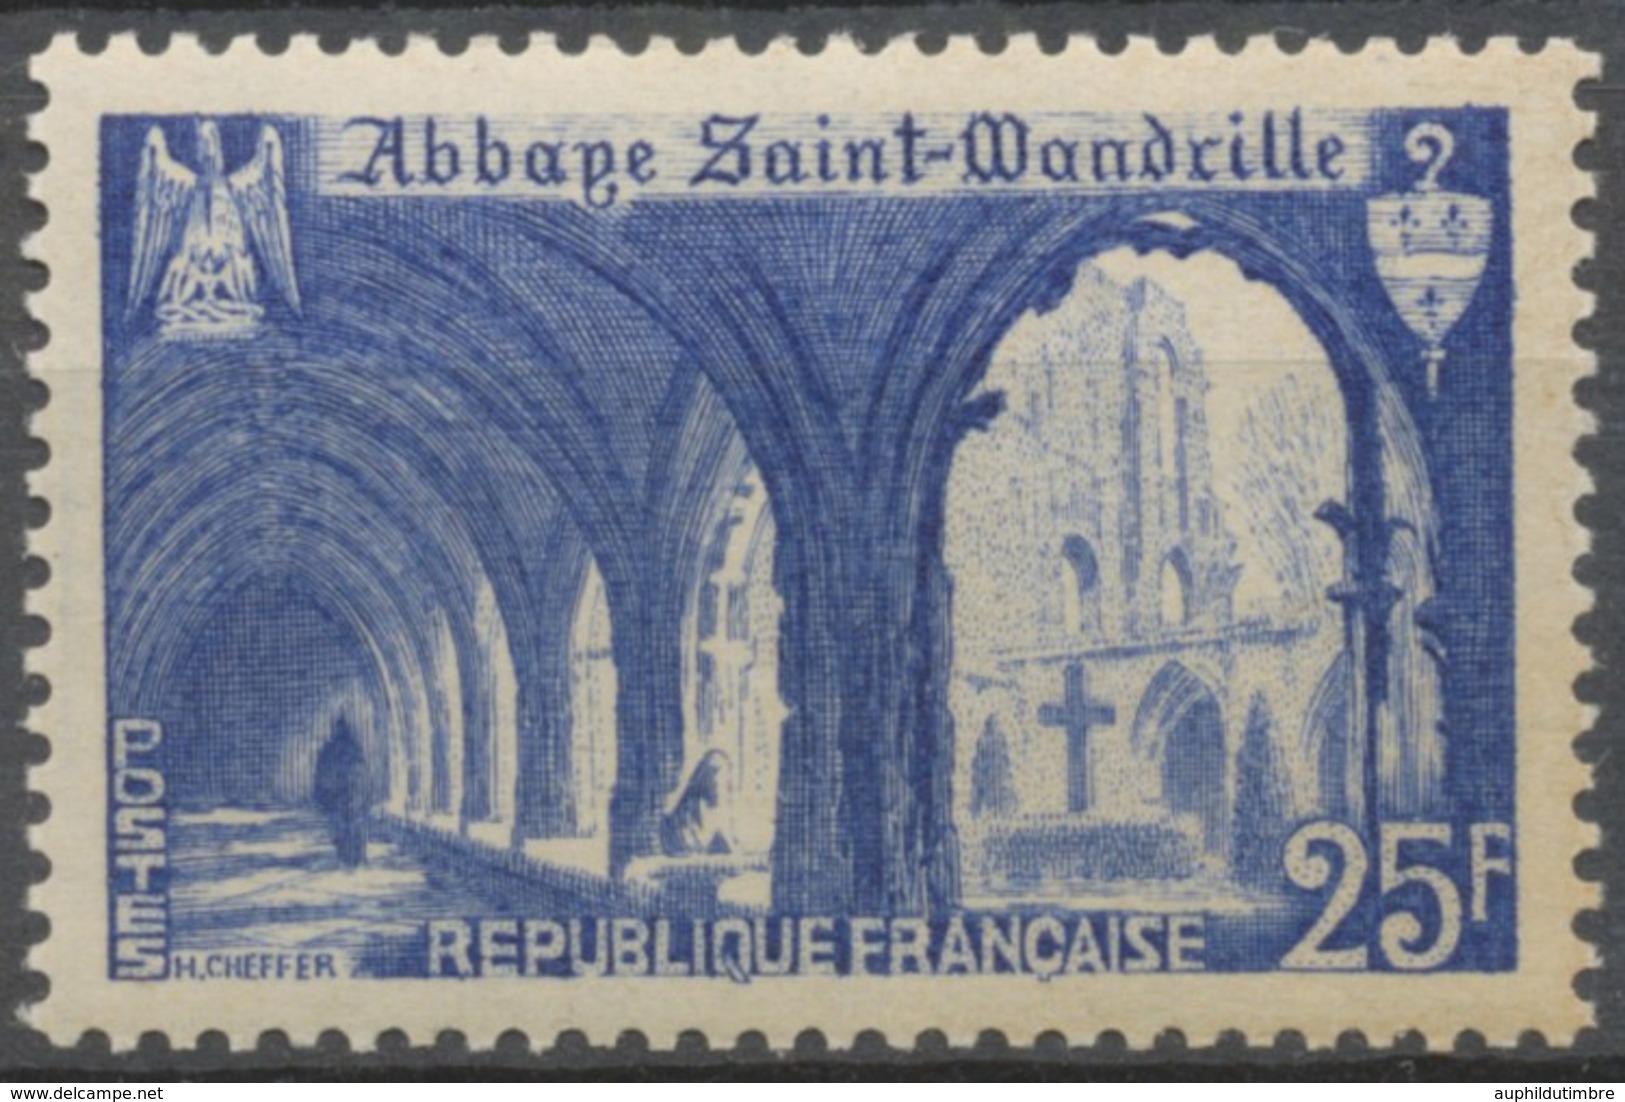 Monuments Et Sites. Abbaye De Saint-Wandrille. 25f. Outremer Neuf Luxe ** Y842 - Neufs